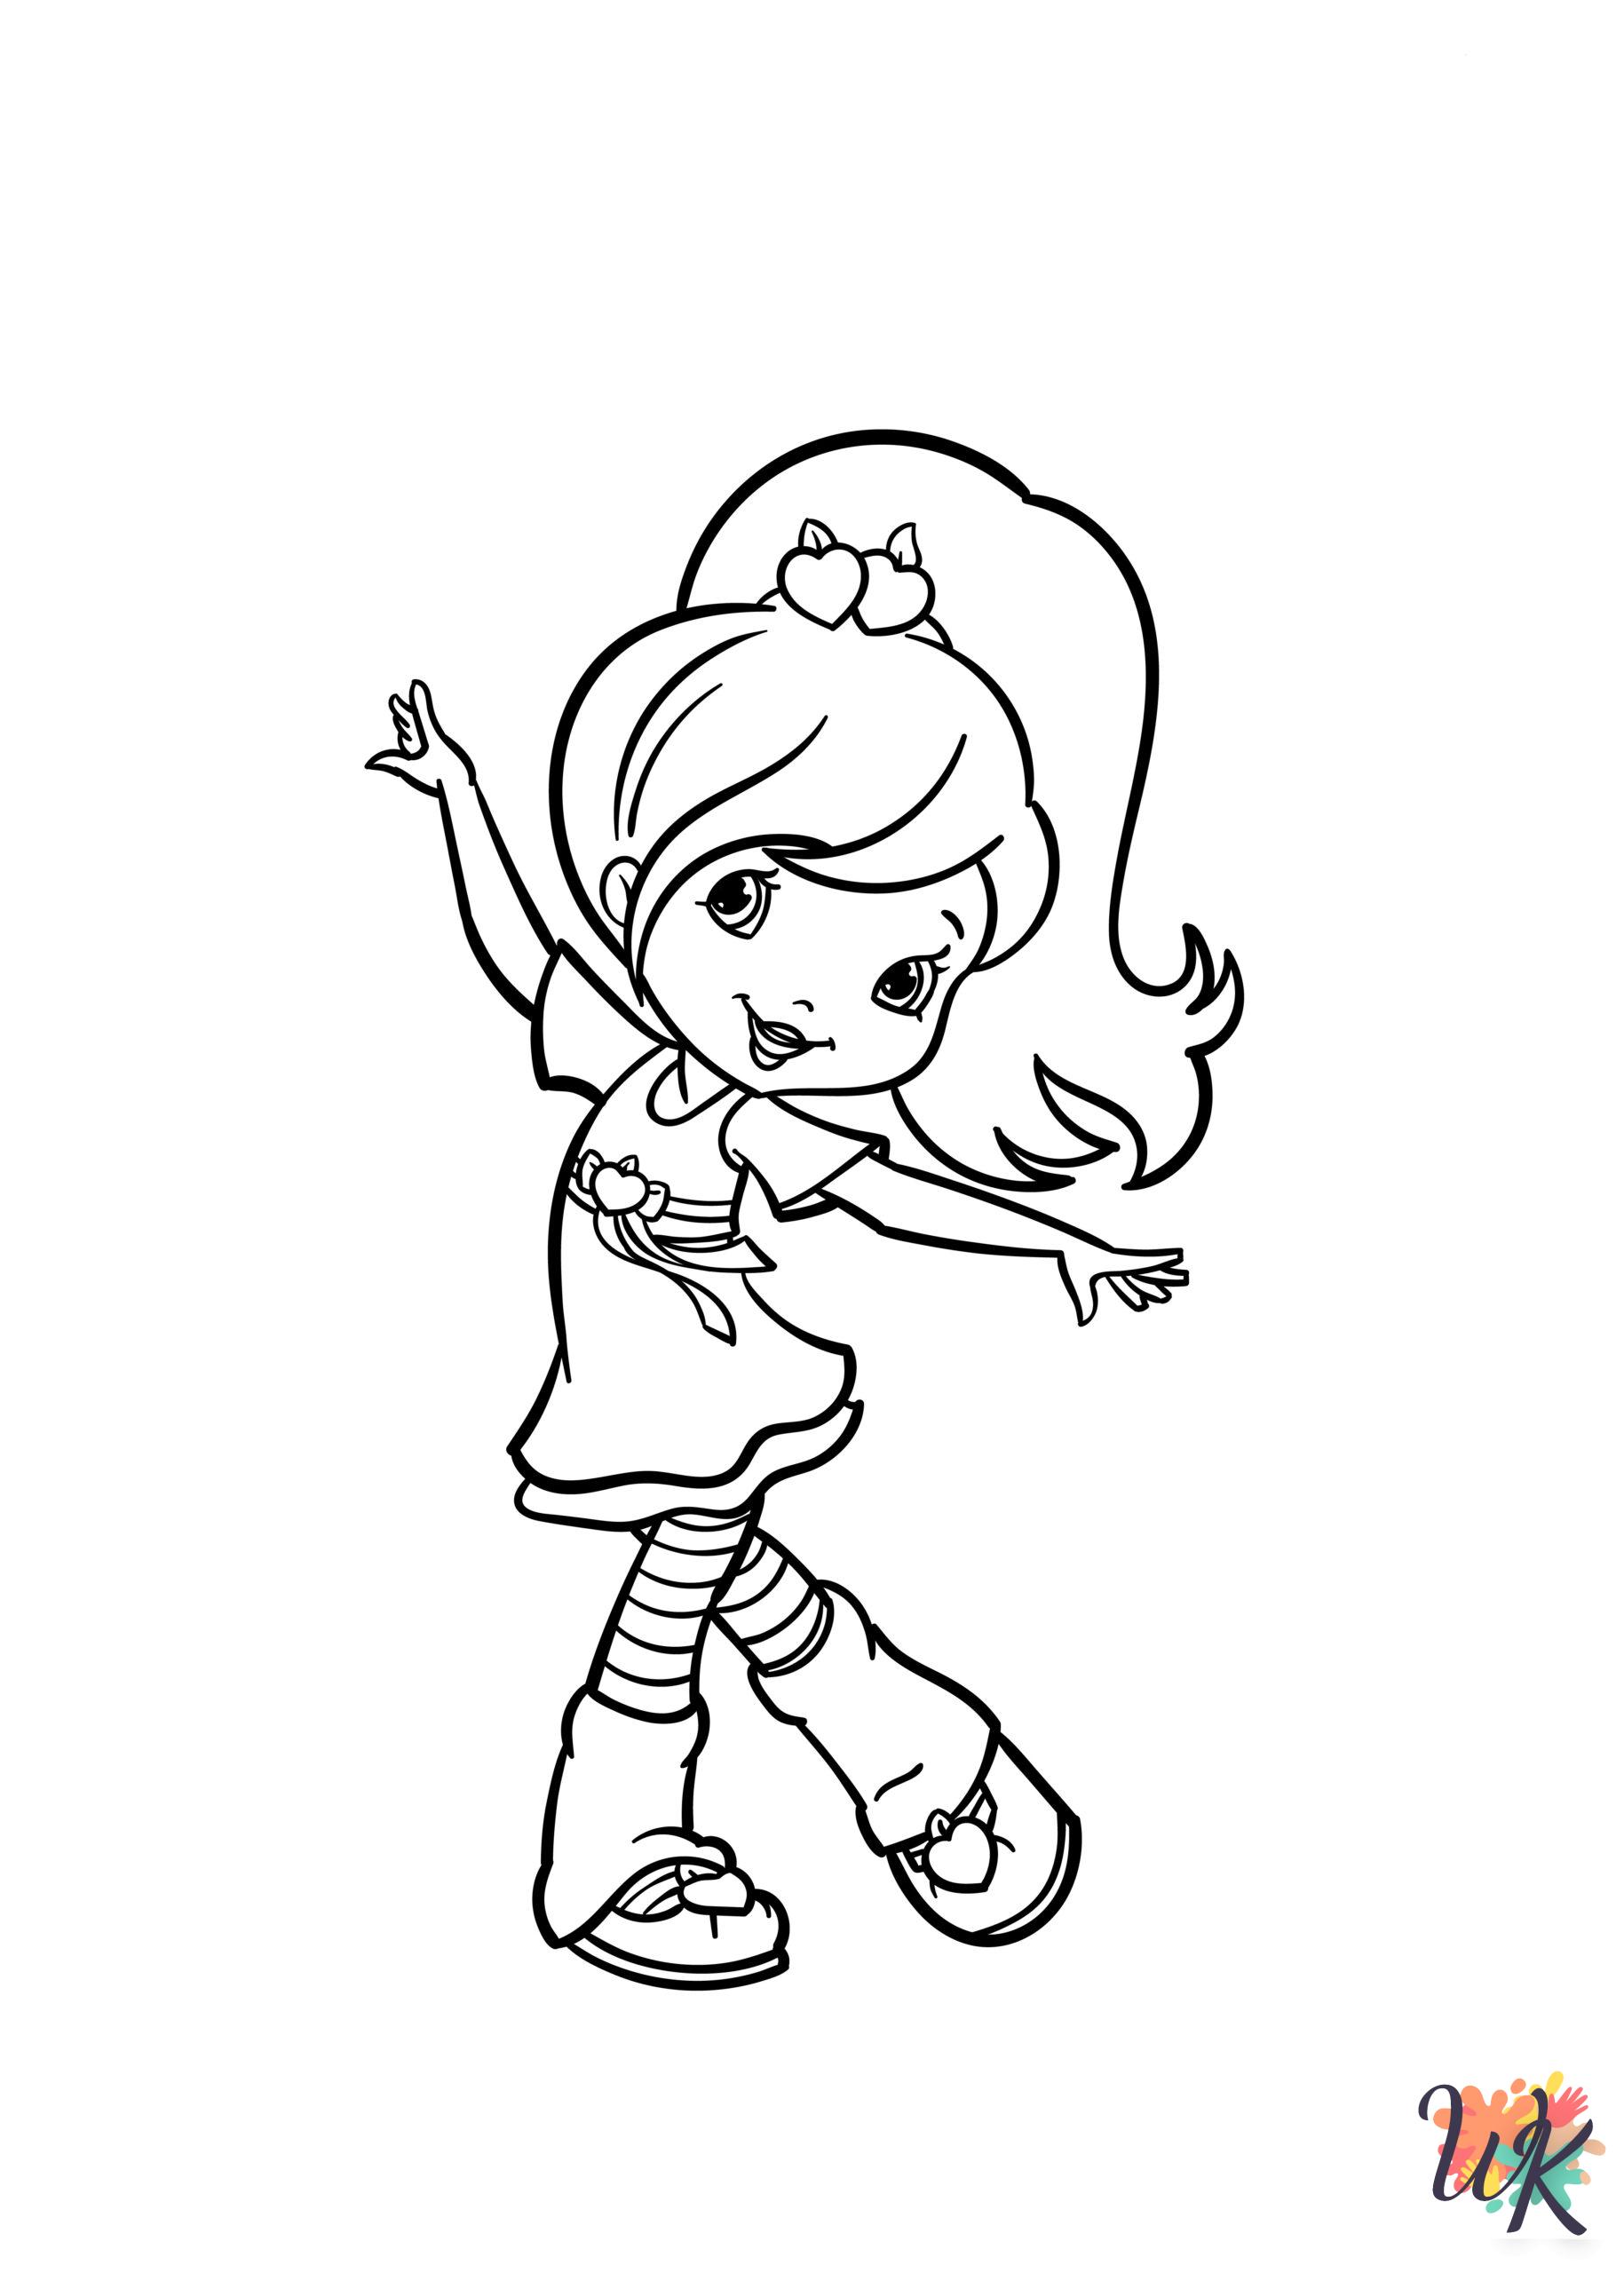 Strawberry Shortcake cards coloring pages